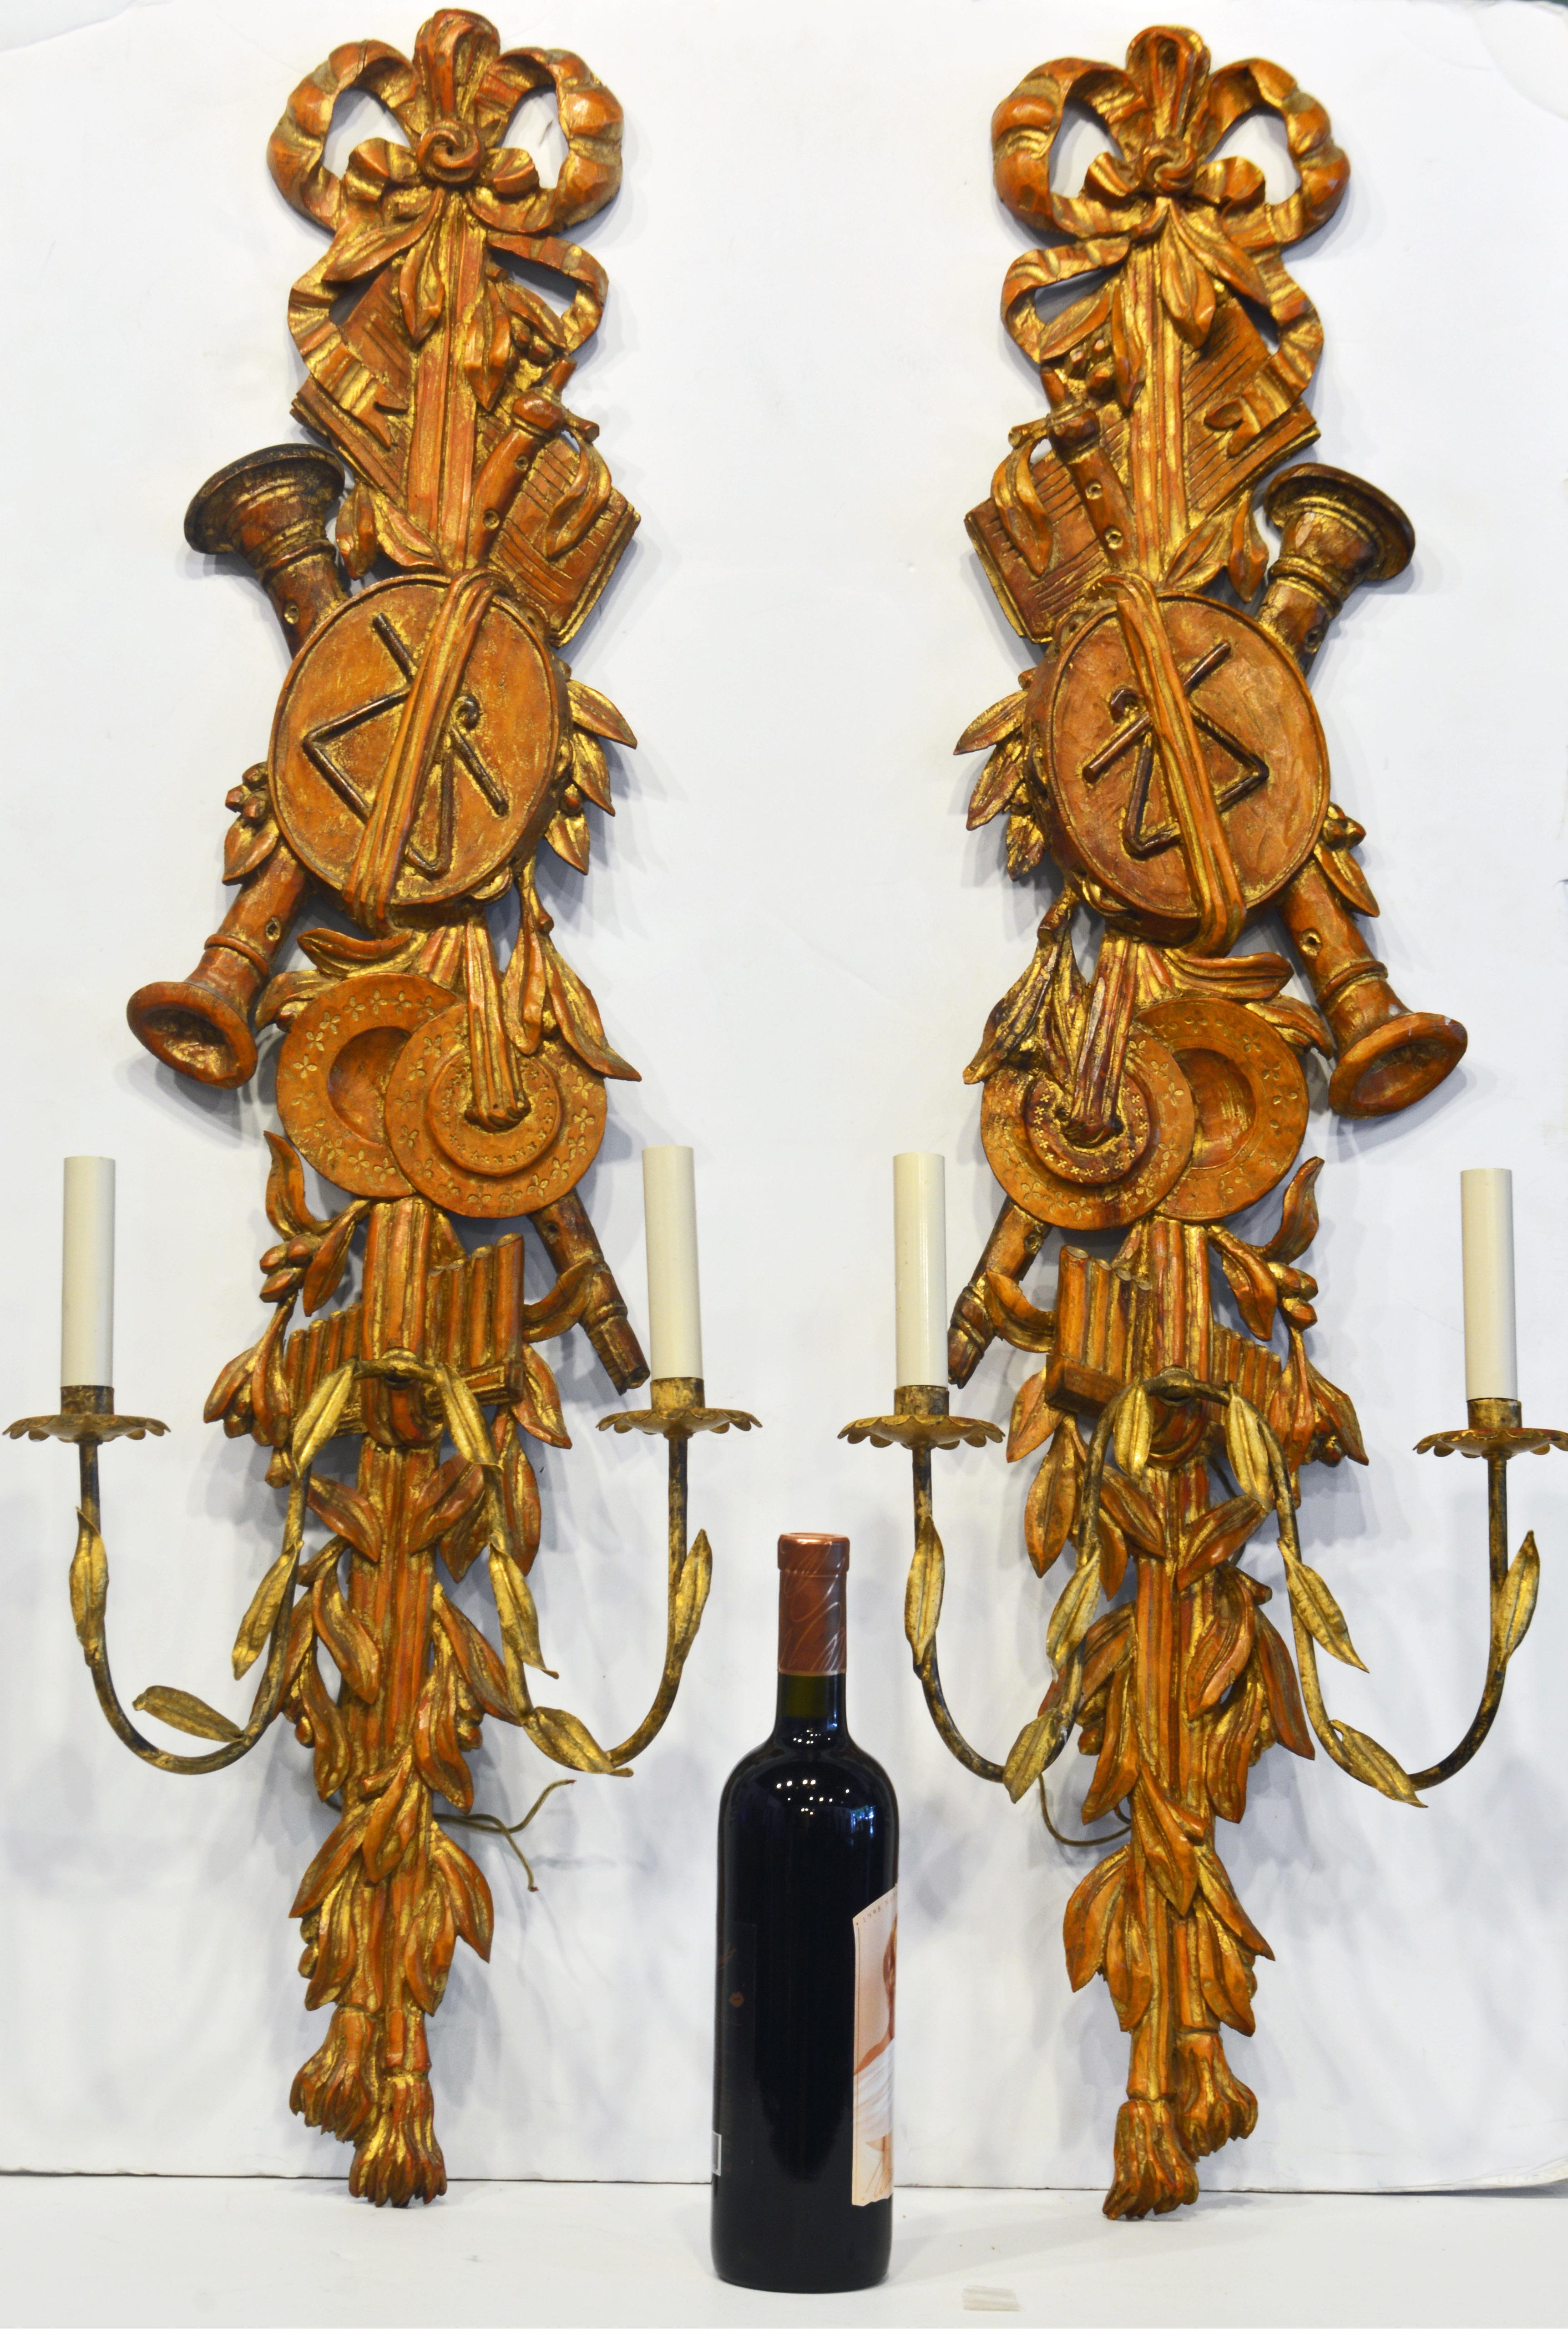 Almost 40 inches tall these Italian carved gilt and wood wall sconces are impressive. The carvings reflect musical instruments, leaf work, ribbons and berries. The two curved gilt metal light light arms are decorated with gilt tole leaves. The style